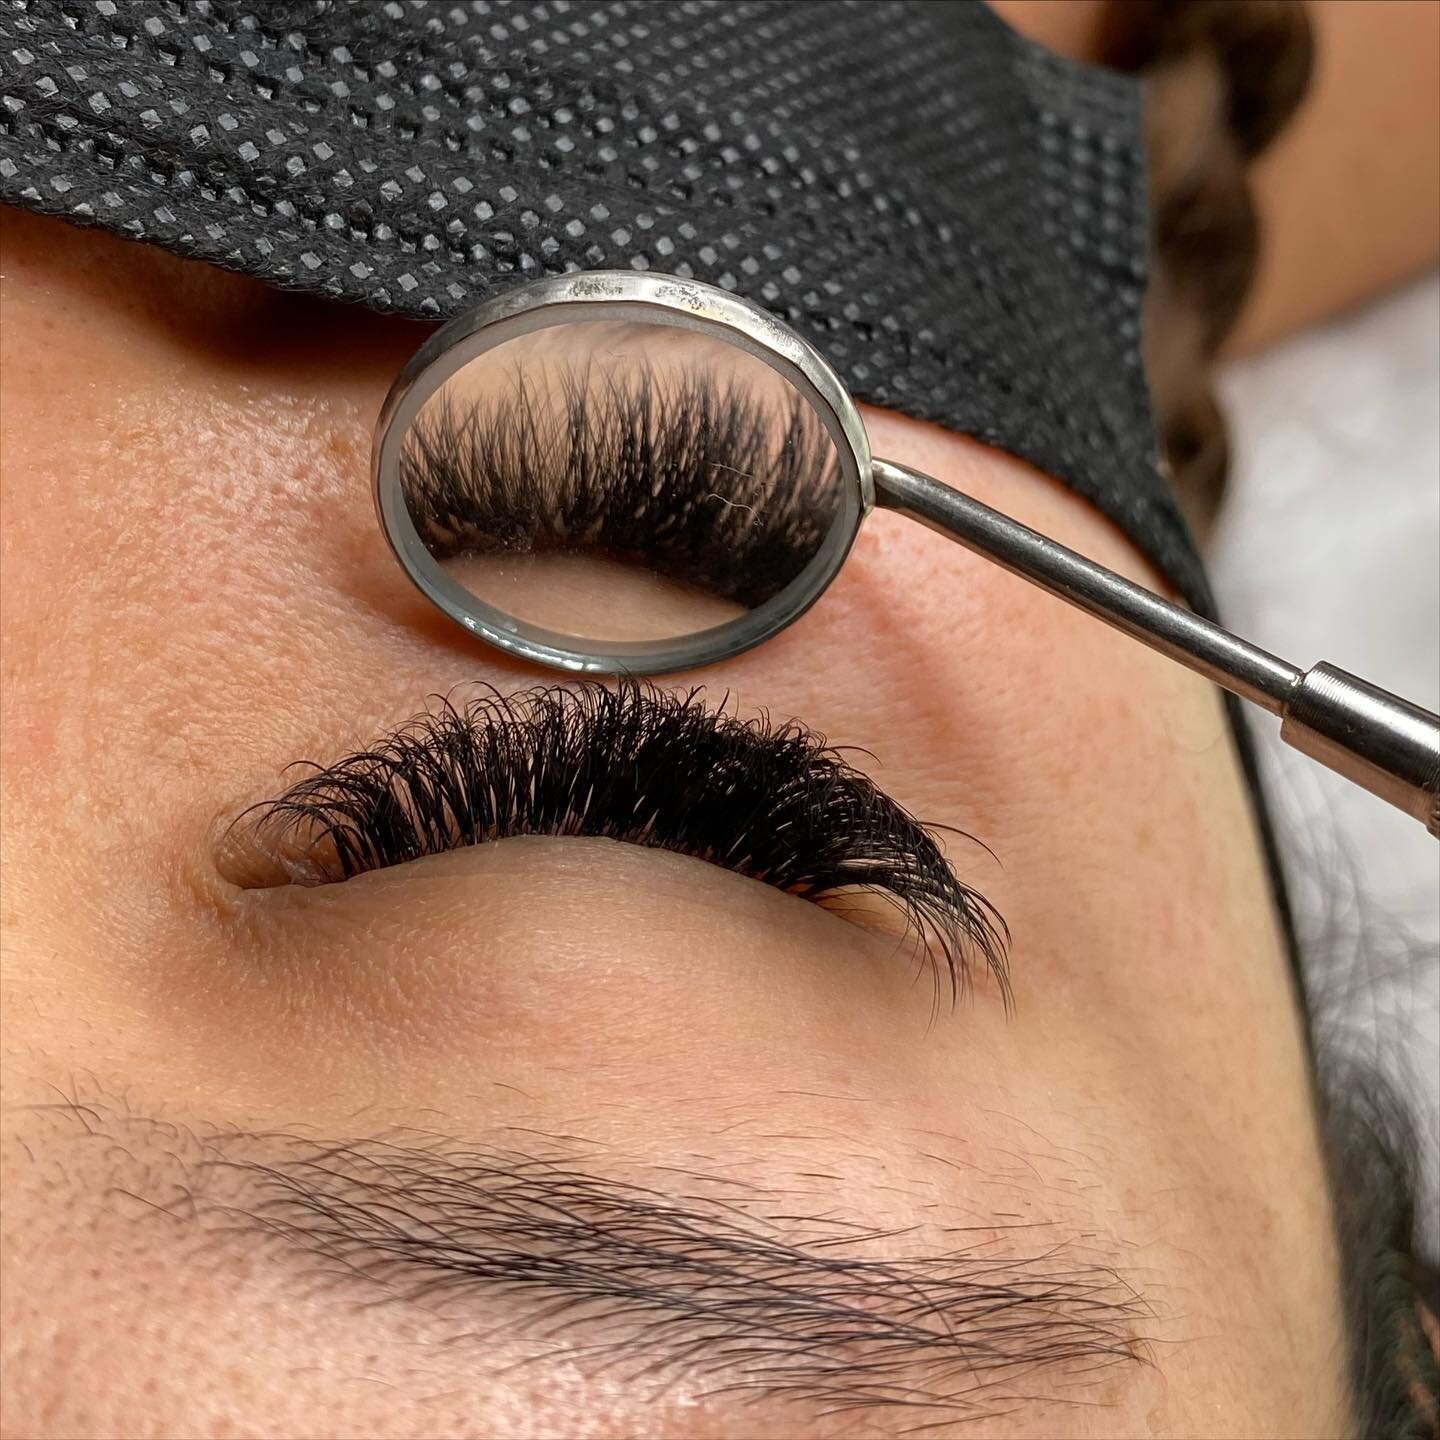 Wispy Hybrid, Cat Eye With more density on the outside corners. I love when my clients are specific with the design they want!

#lashesextensions #lashes #lashesfordays #lashesextension #lashesonlashes #volumelashes #lashesonfleek #eyelashextensions 